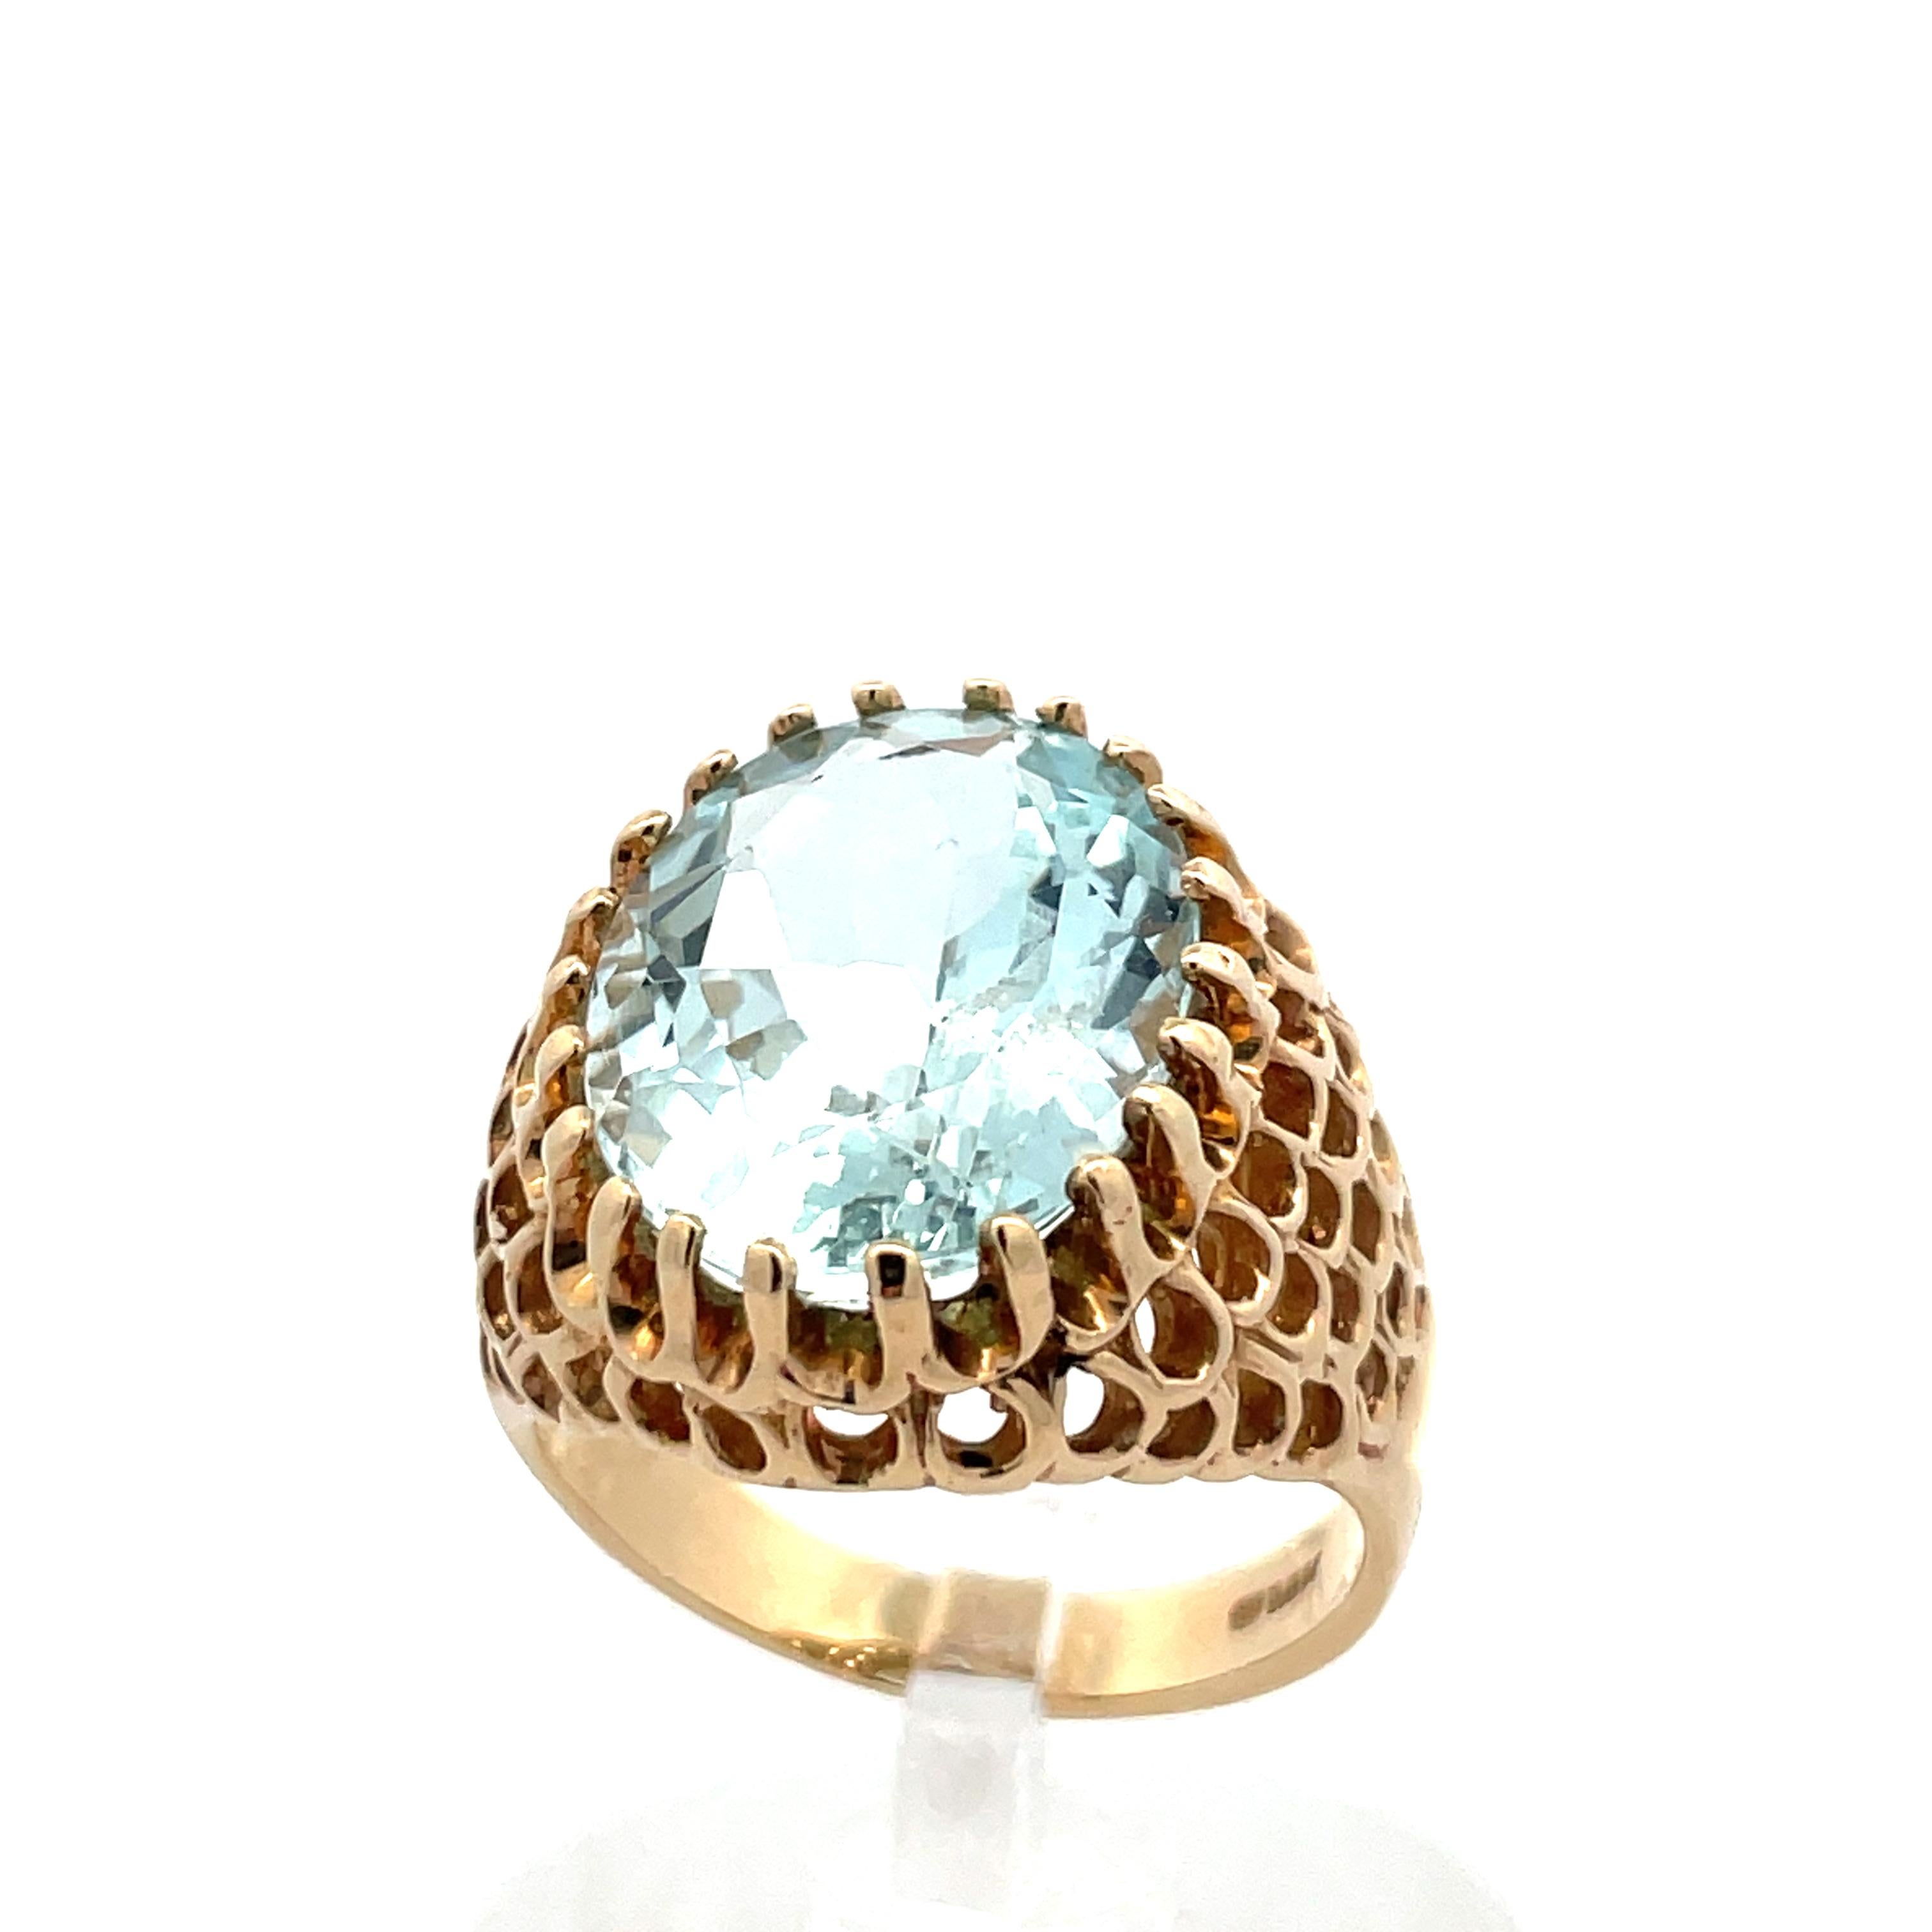 This is a beautiful mid-century contemporary ring made from 14k yellow gold filigree with a stunning  aquamarine. The geometric filigree is very mid-century, featuring distinctive rows and a random pattern, making this ring unique to itself. The